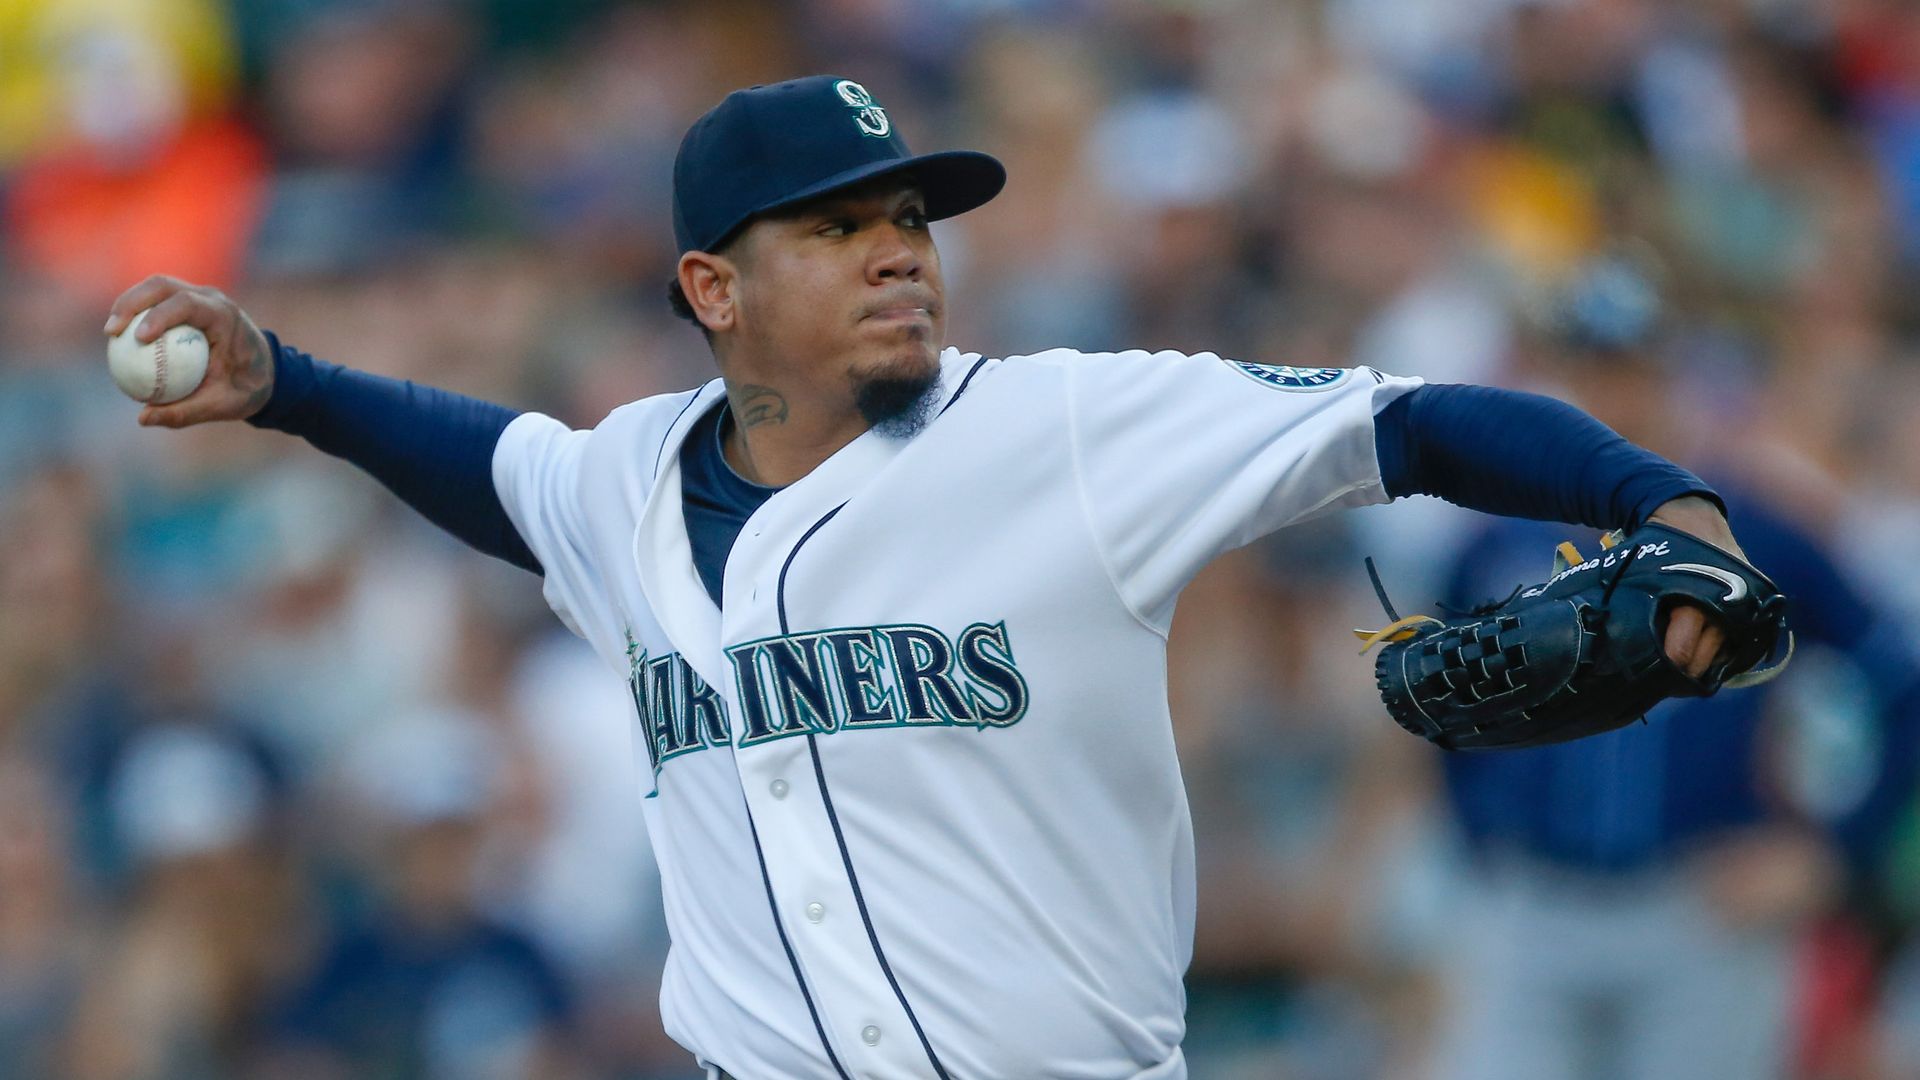 Former pitcher Félix Hernández will join the Mariners' Hall of